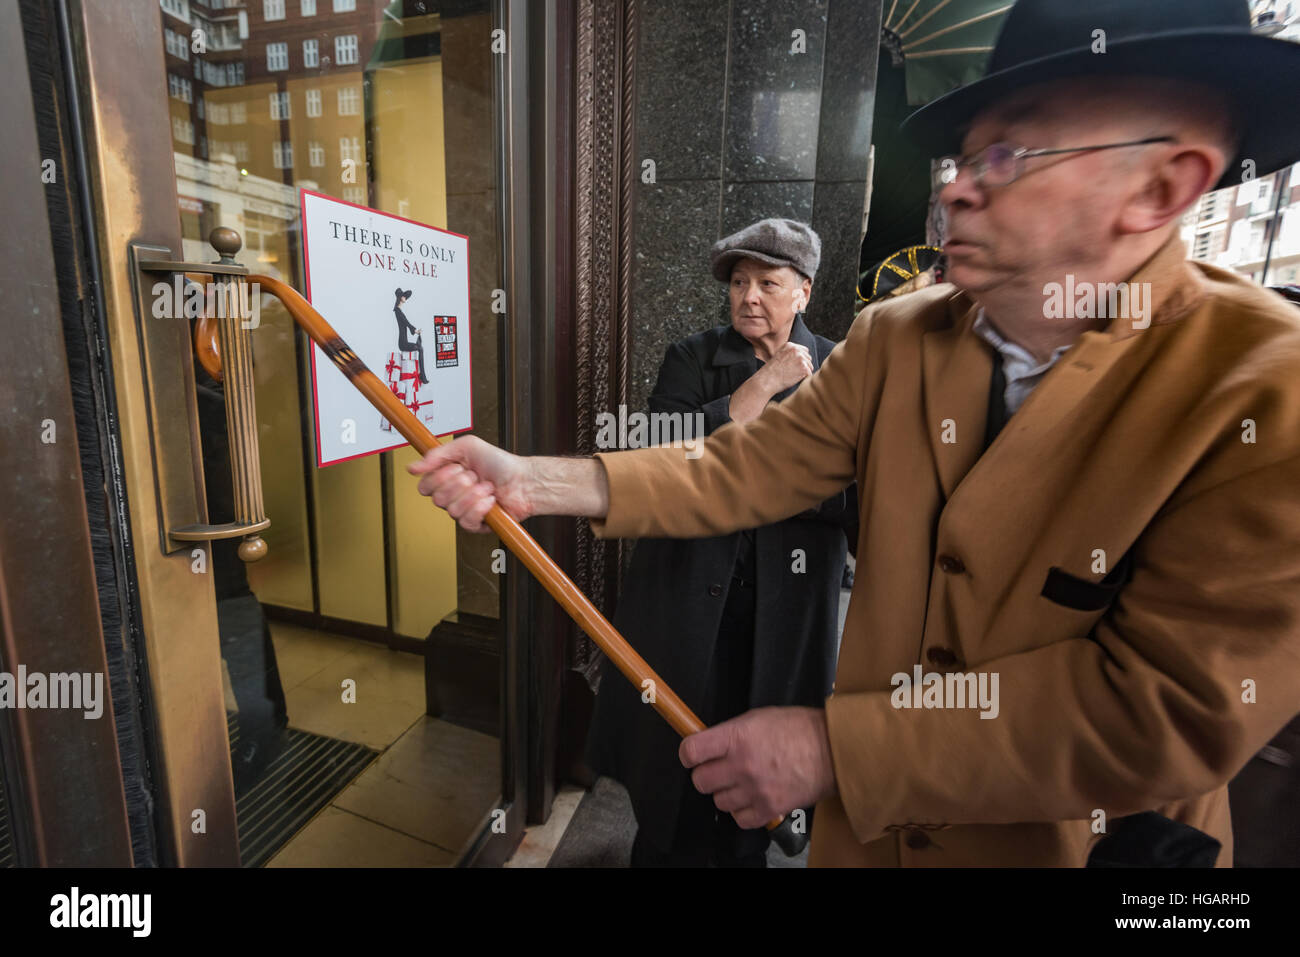 London, UK. 7th January 2017. Ian BOne of Class War hooks his walking stick around the door handle at Harrods as they support the protest by grass roots trade union United Voices of the World calling for 100% of the service charges to go to staff rather than the vast profits of the owners, the Qatari royal family. Credit: Peter Marshall/Alamy Live News Stock Photo